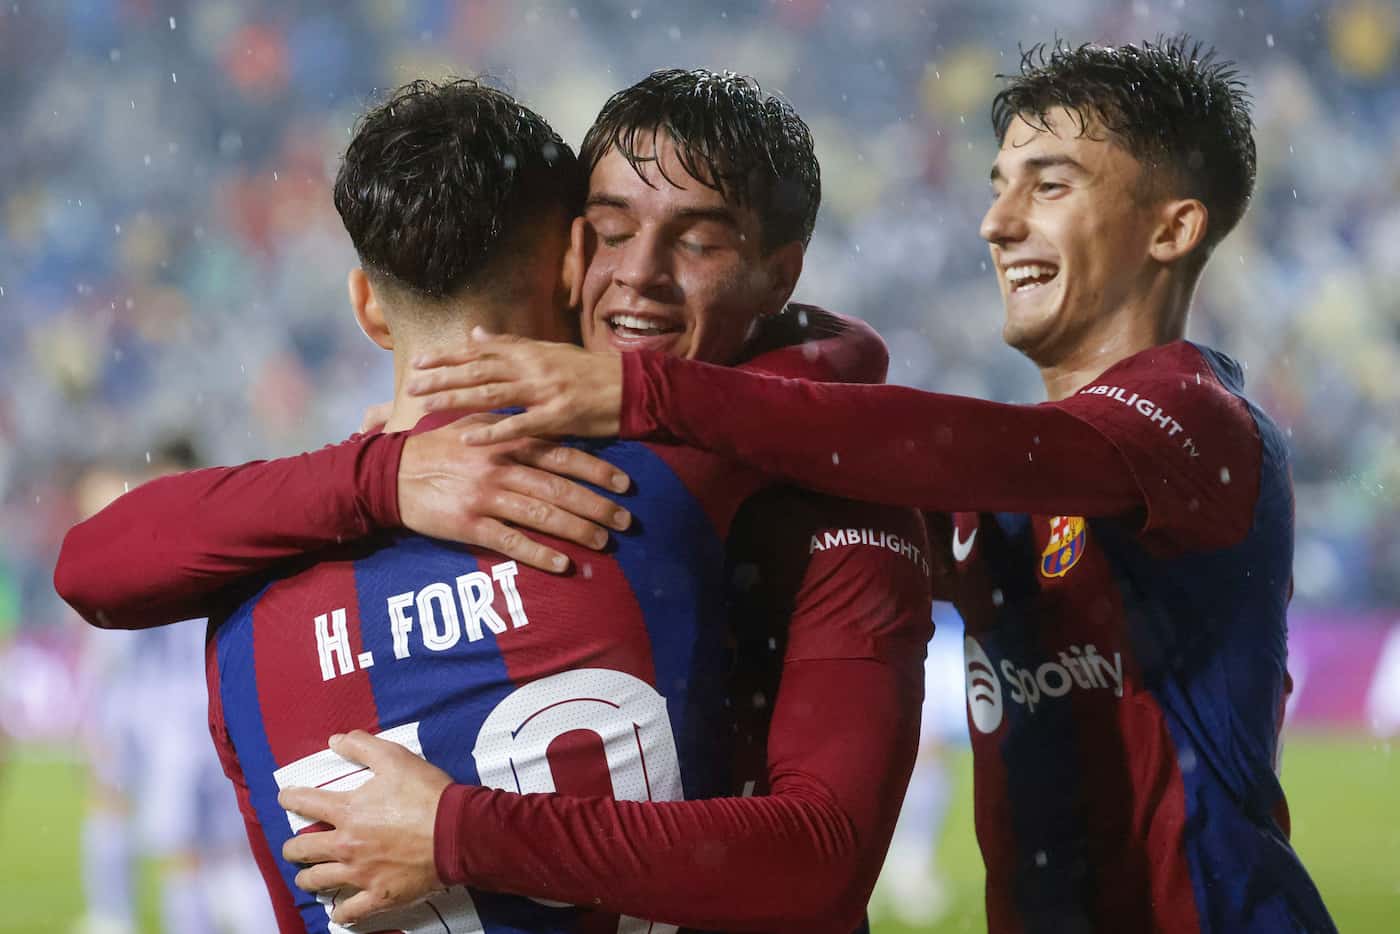 Barcelona’s Hector Fort celebrates after scoring a goal with forward Marc Guiv (center), and...